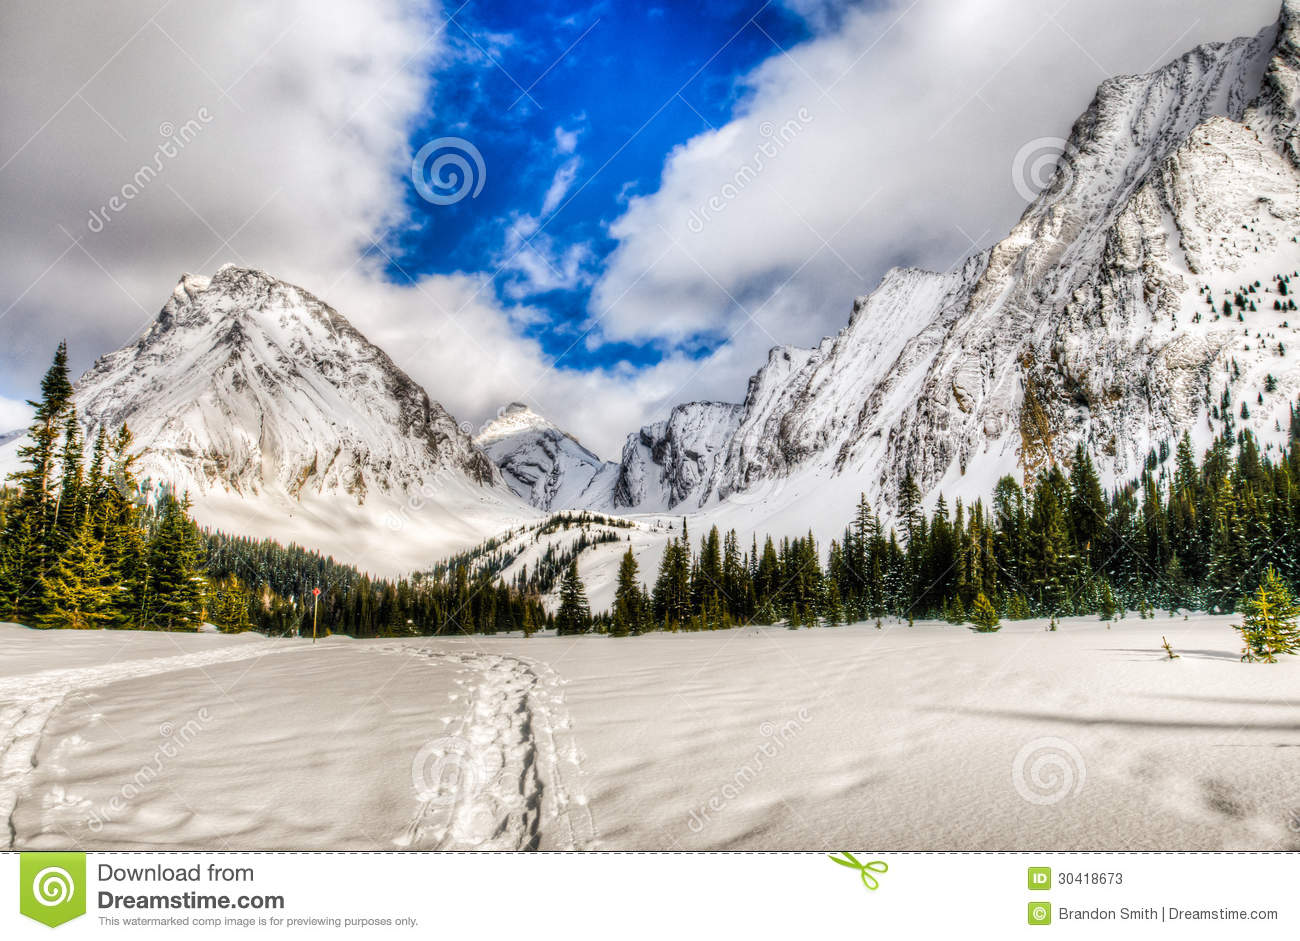 Winter Scenery Mountains Nature Scenic Snow Picture